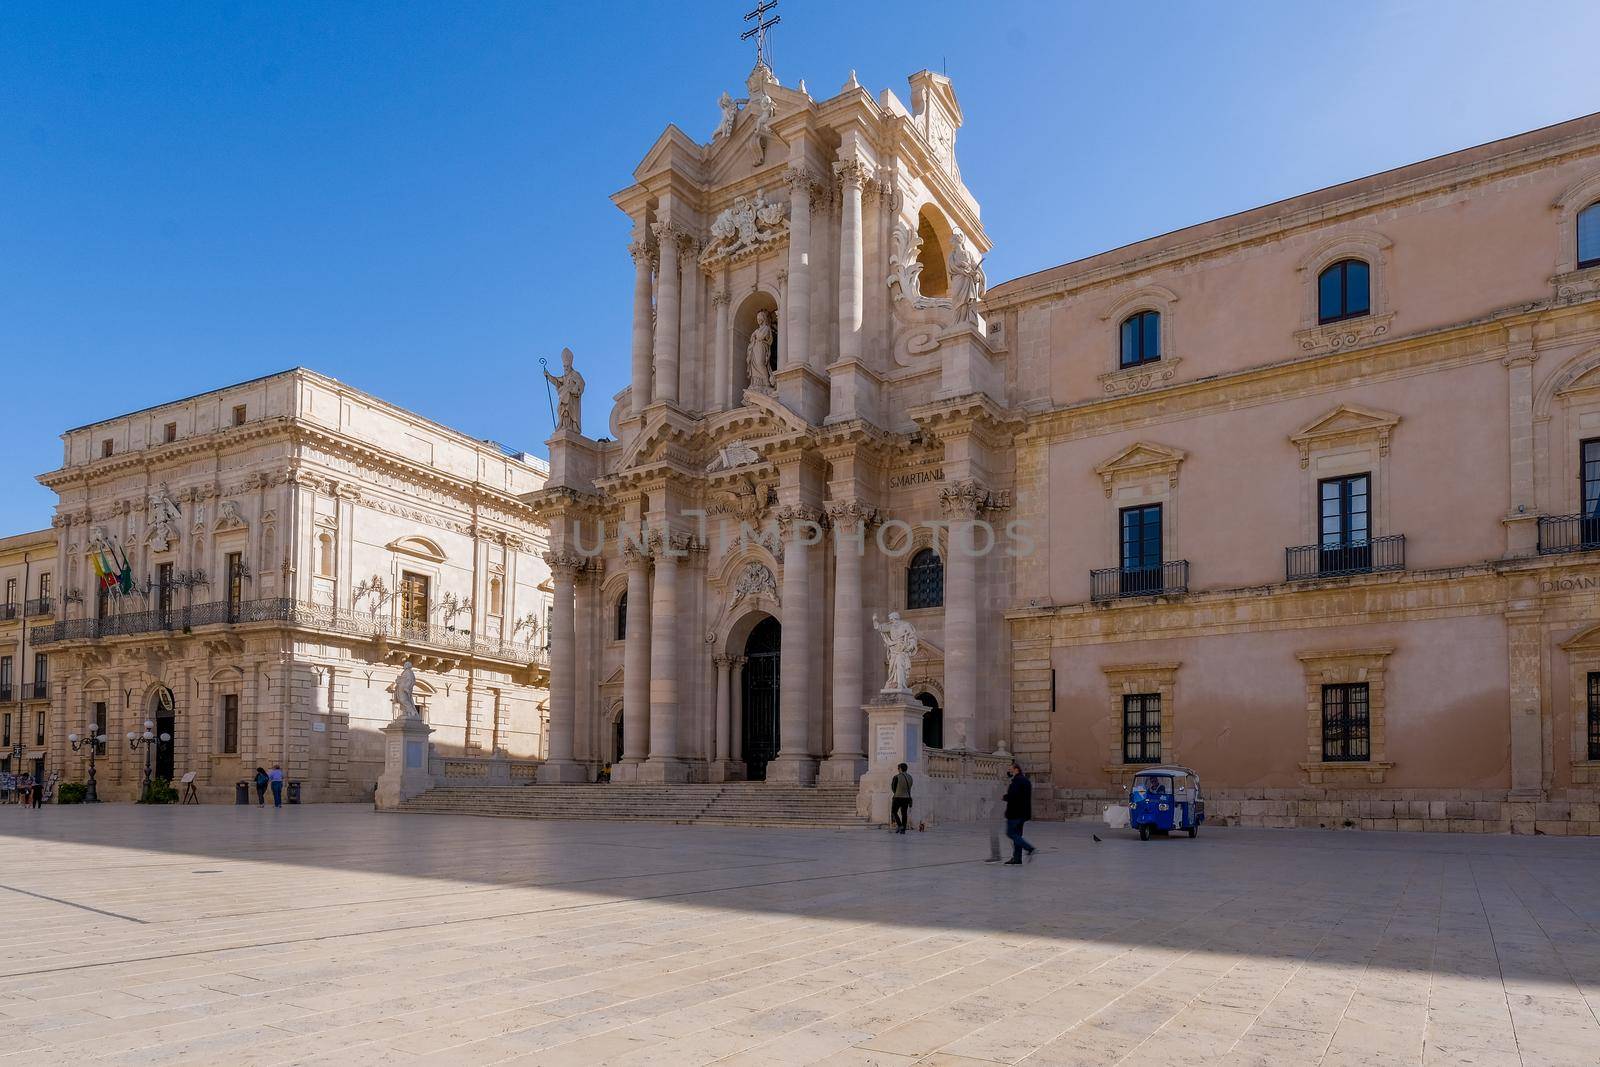 Ortigia in Syracuse in the Morning. Travel Photography from Syracuse, Italy on the island of Sicily. Cathedral Plaza and market with people whear face protection during the 2020 pandemic by fokkebok